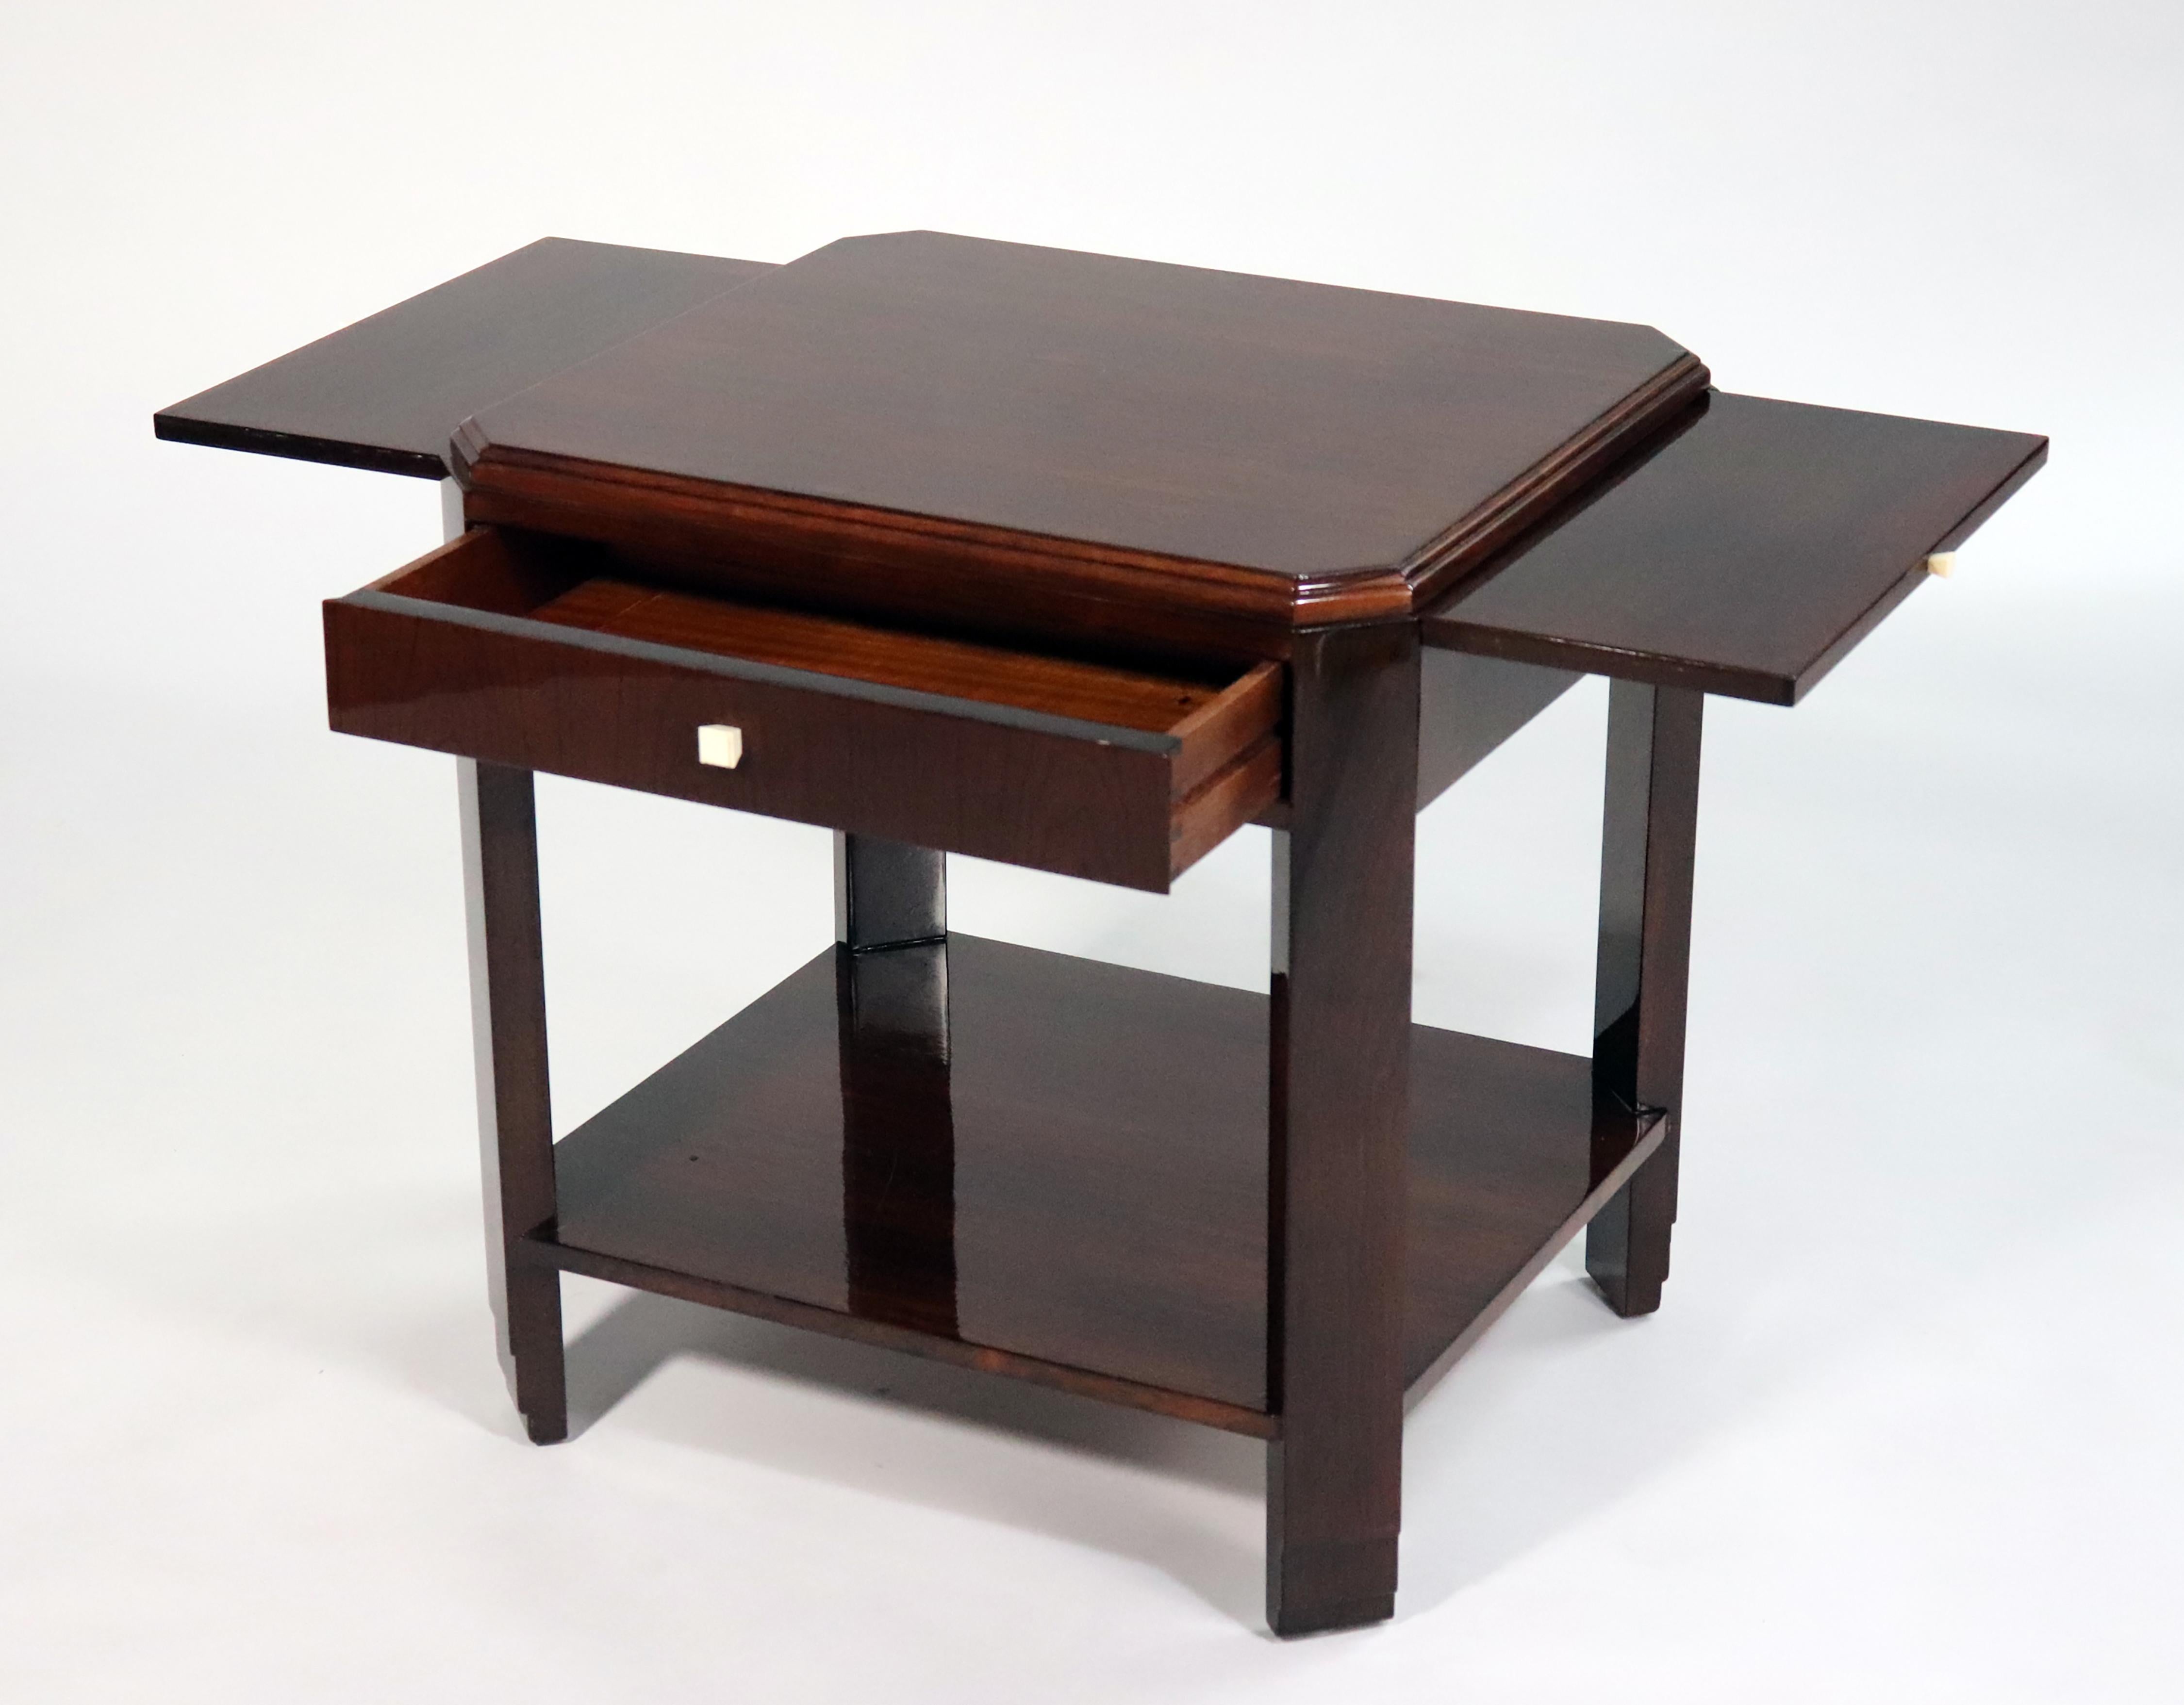 Art Deco side table table by Decoration Interieure Modernes (DIM) made out of rosewood with two small drawers.
Made in France
Circa: 1925.